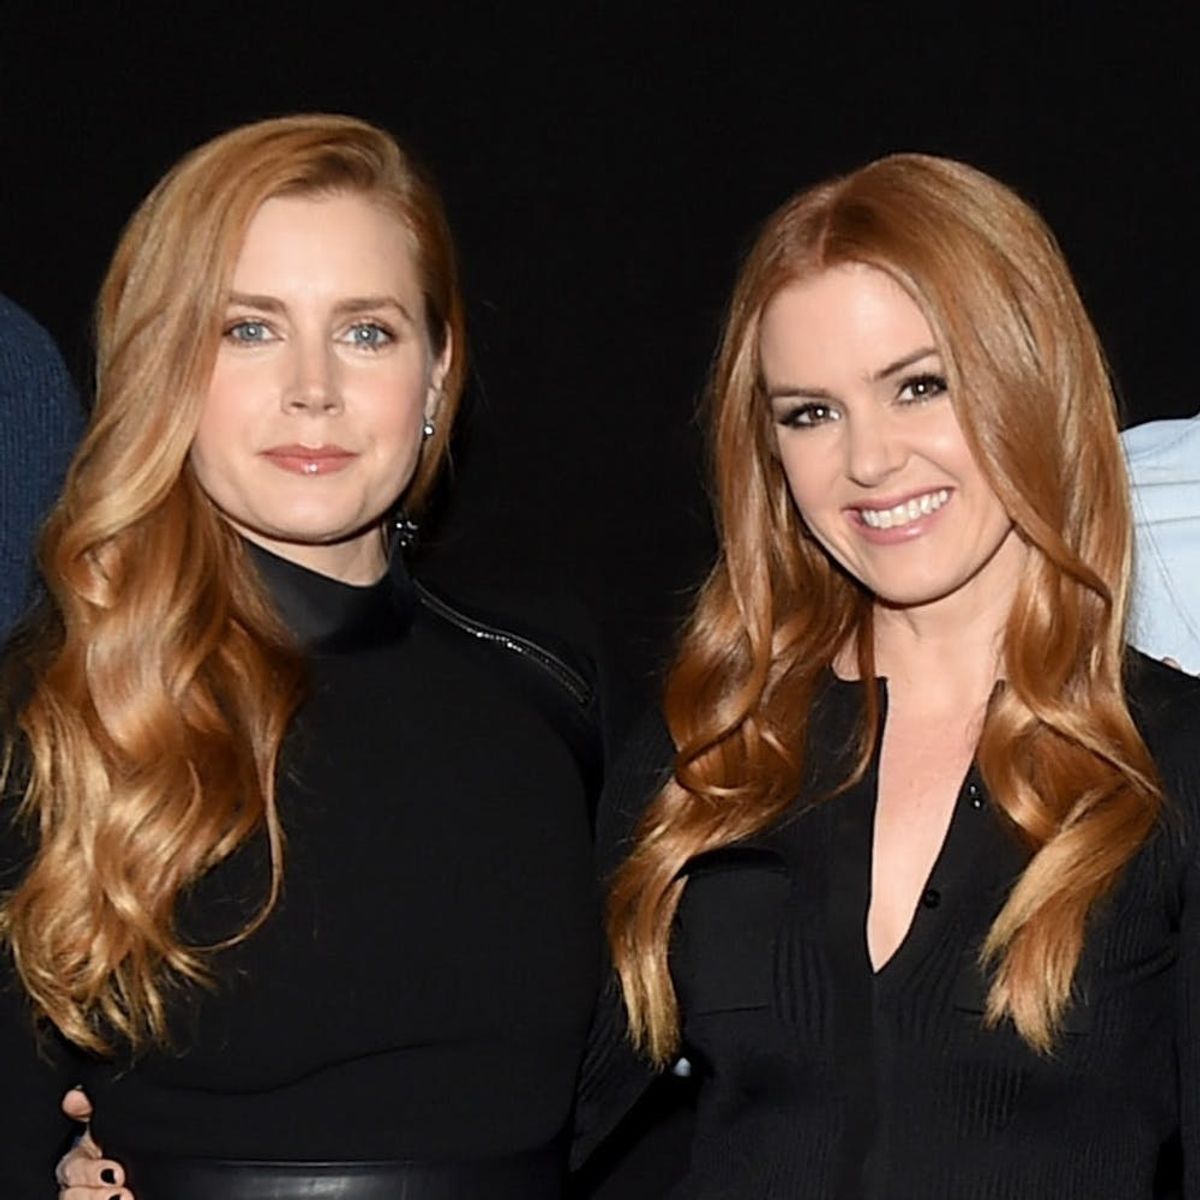 Isla Fisher Reveals Lady Gaga Once Mistook Her for Amy Adams and She Played Along